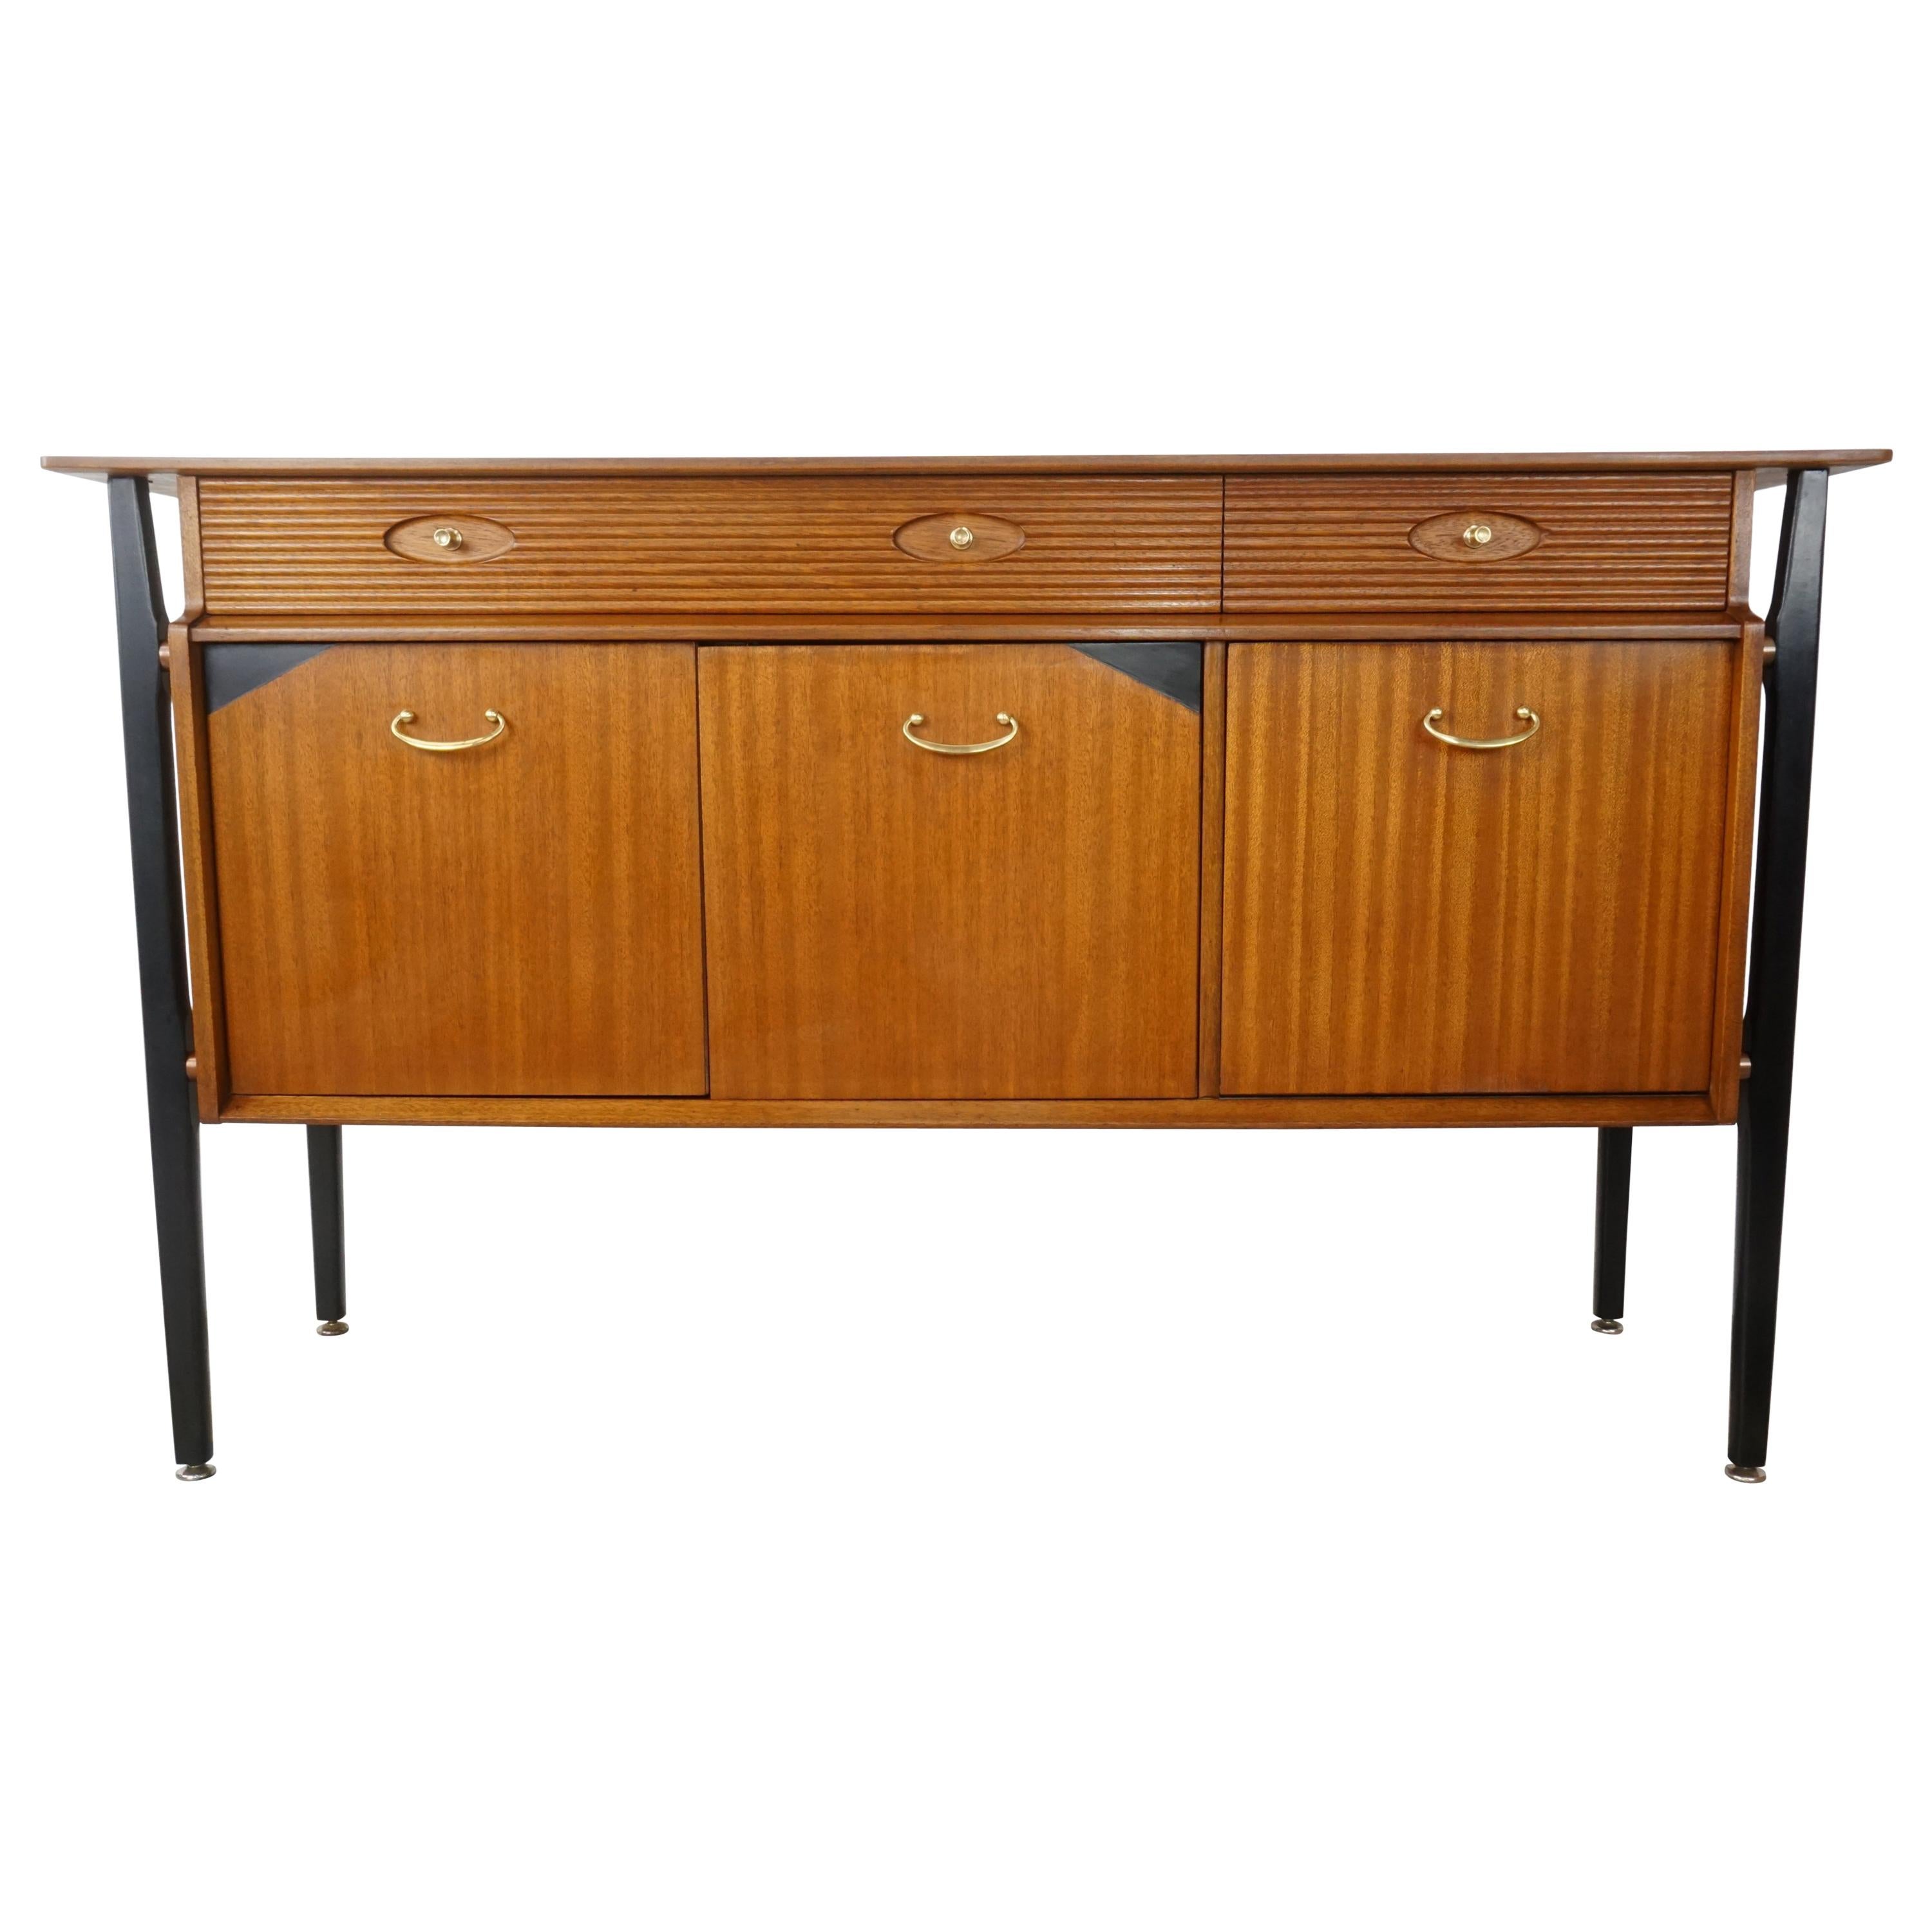 1960s Design Black Lacquered and Teak Wooden Sideboard